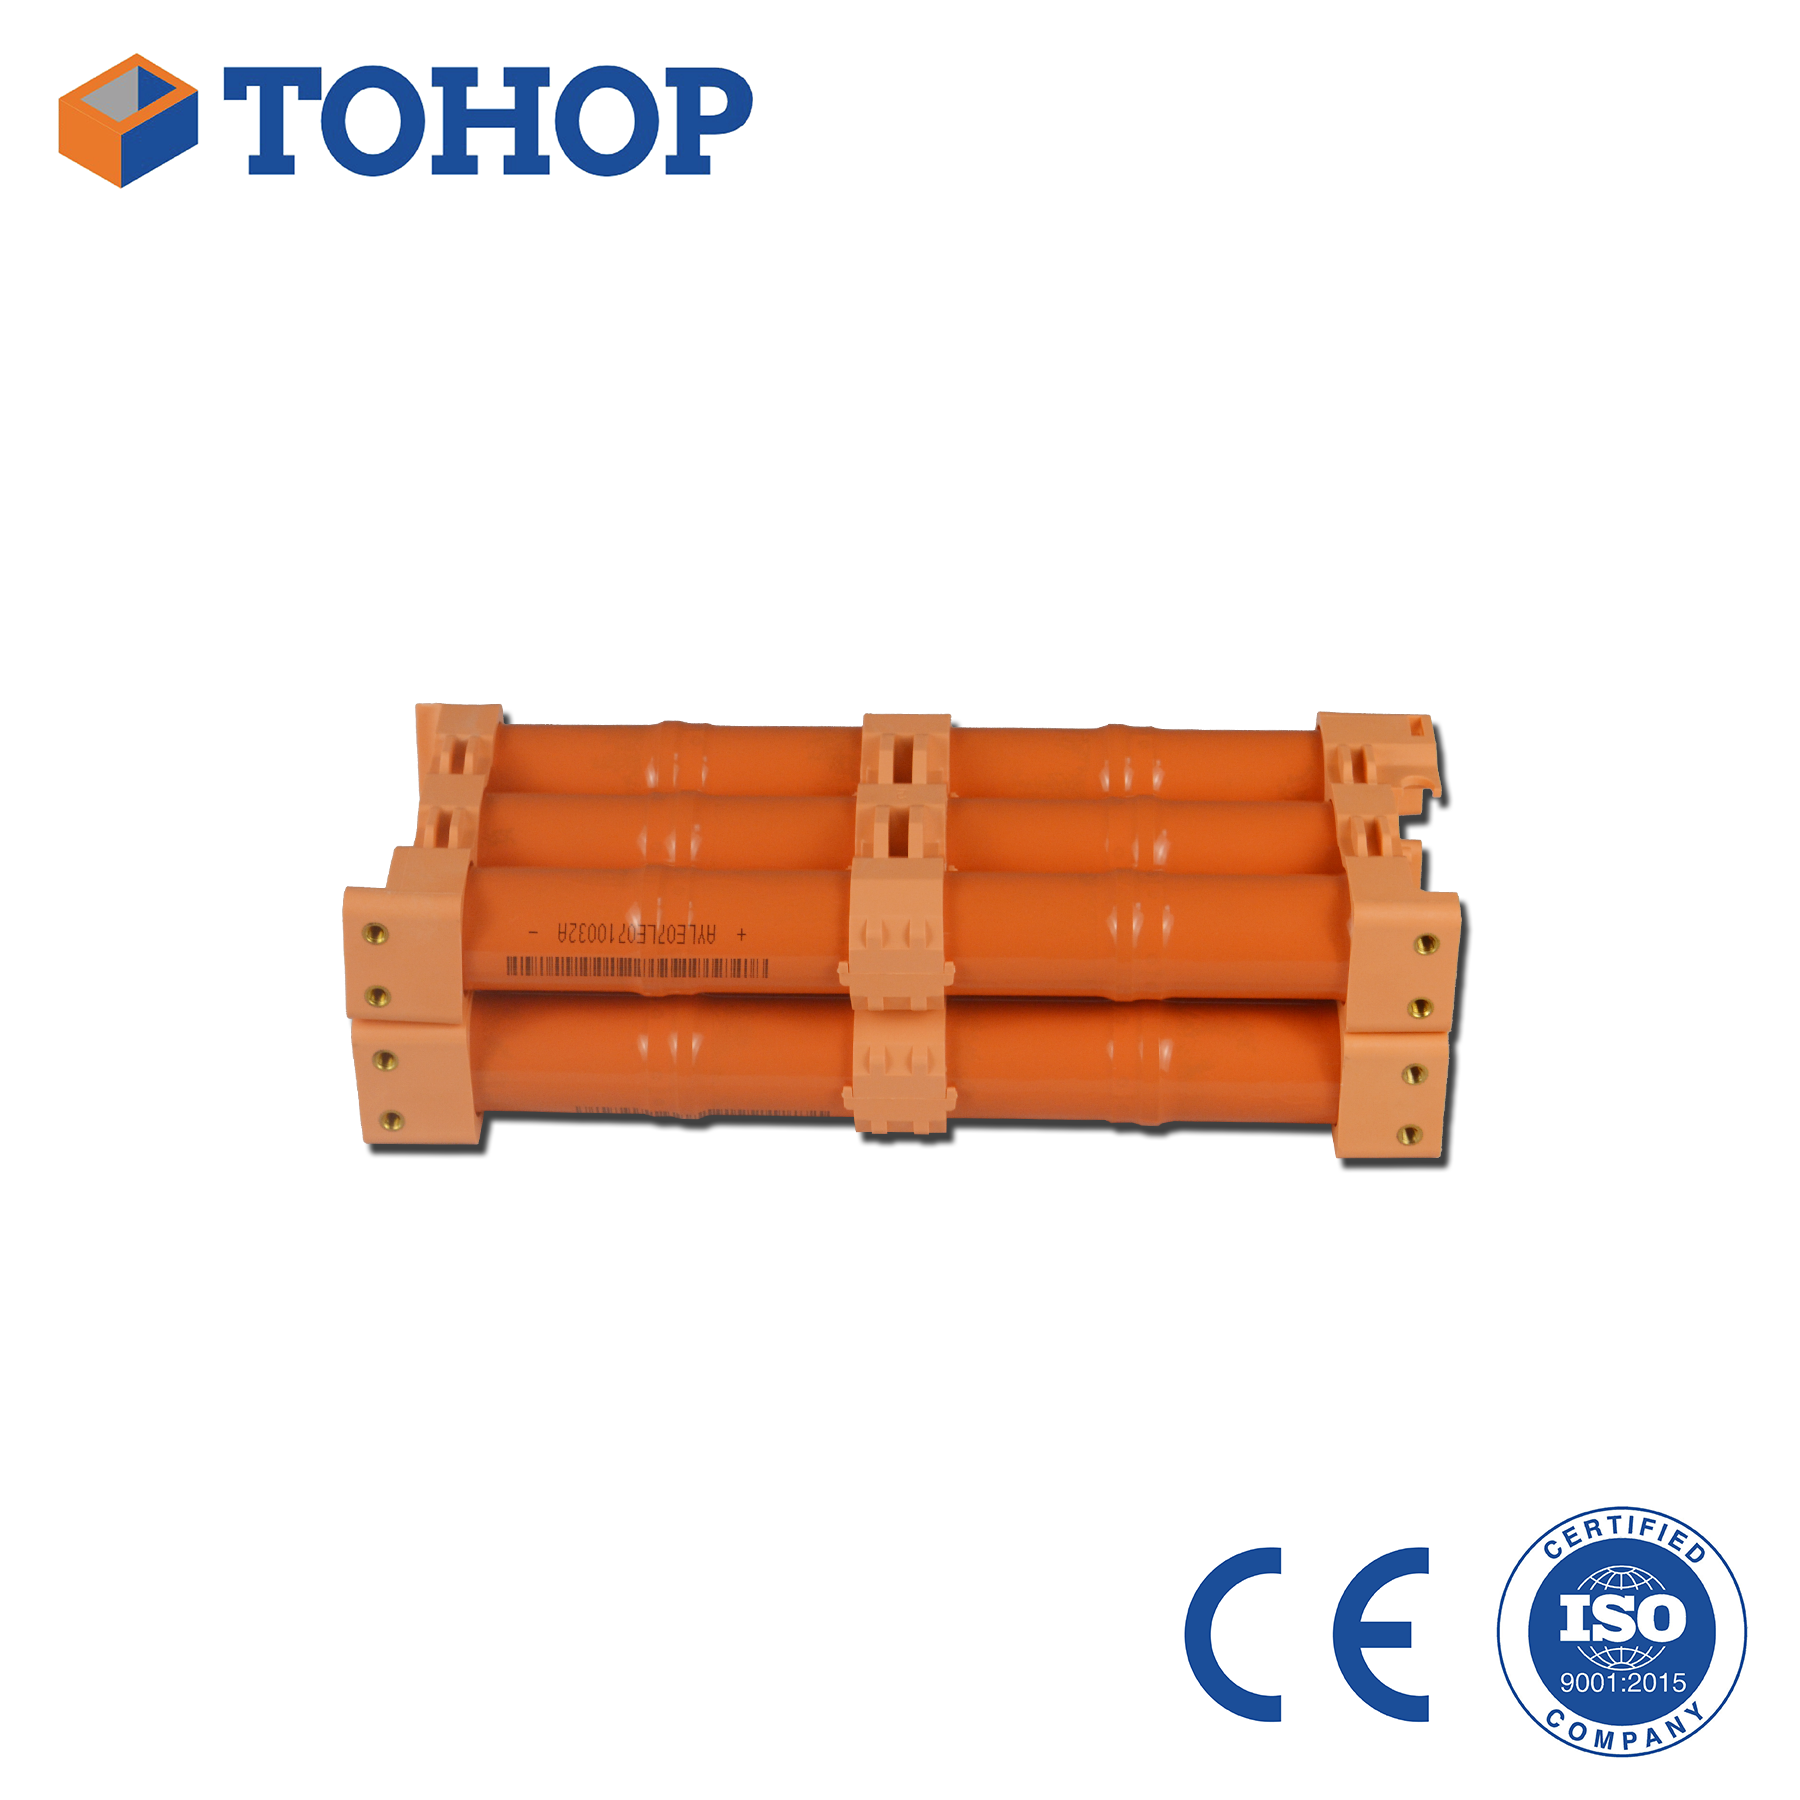 Reliable High Capacity Nimh 14.4v 6.5Ah Cylindrical Battery Module For Toyota for Prius 2010-2014 Prius Hybrid Car Battery